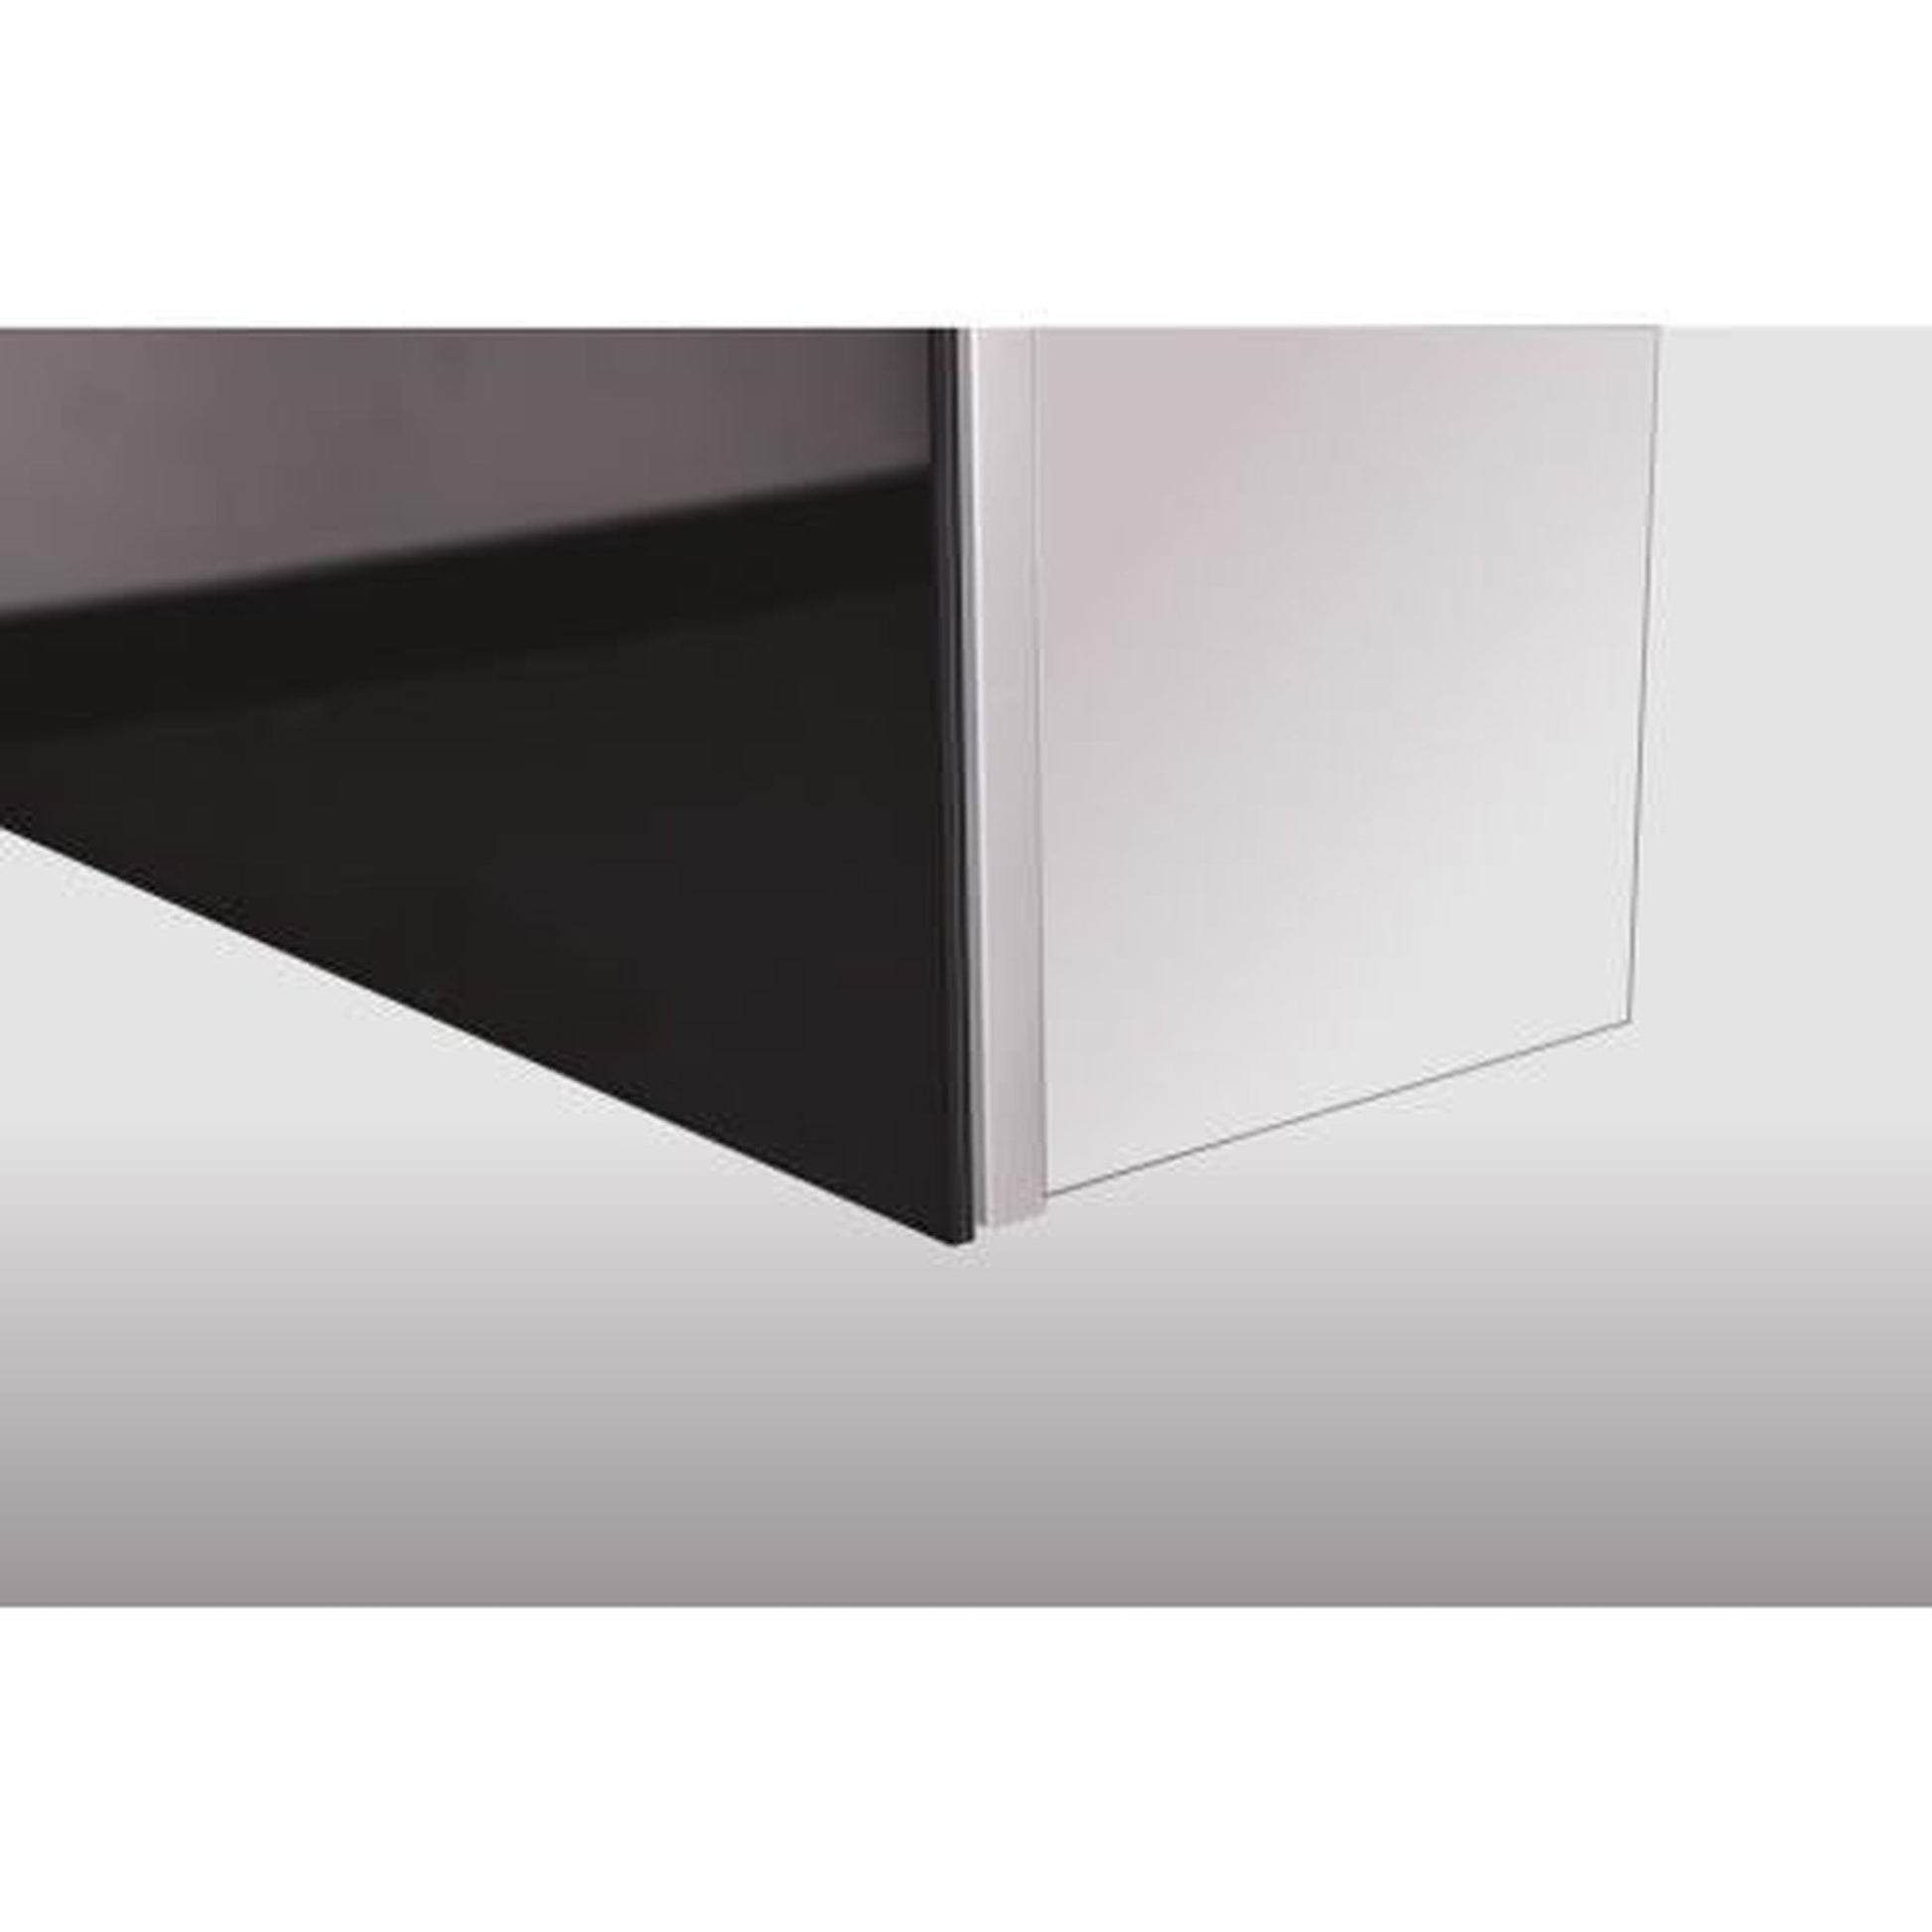 Sidler Tall Surface Mounting Kit for W 15" to 23", D 6" Cabinets